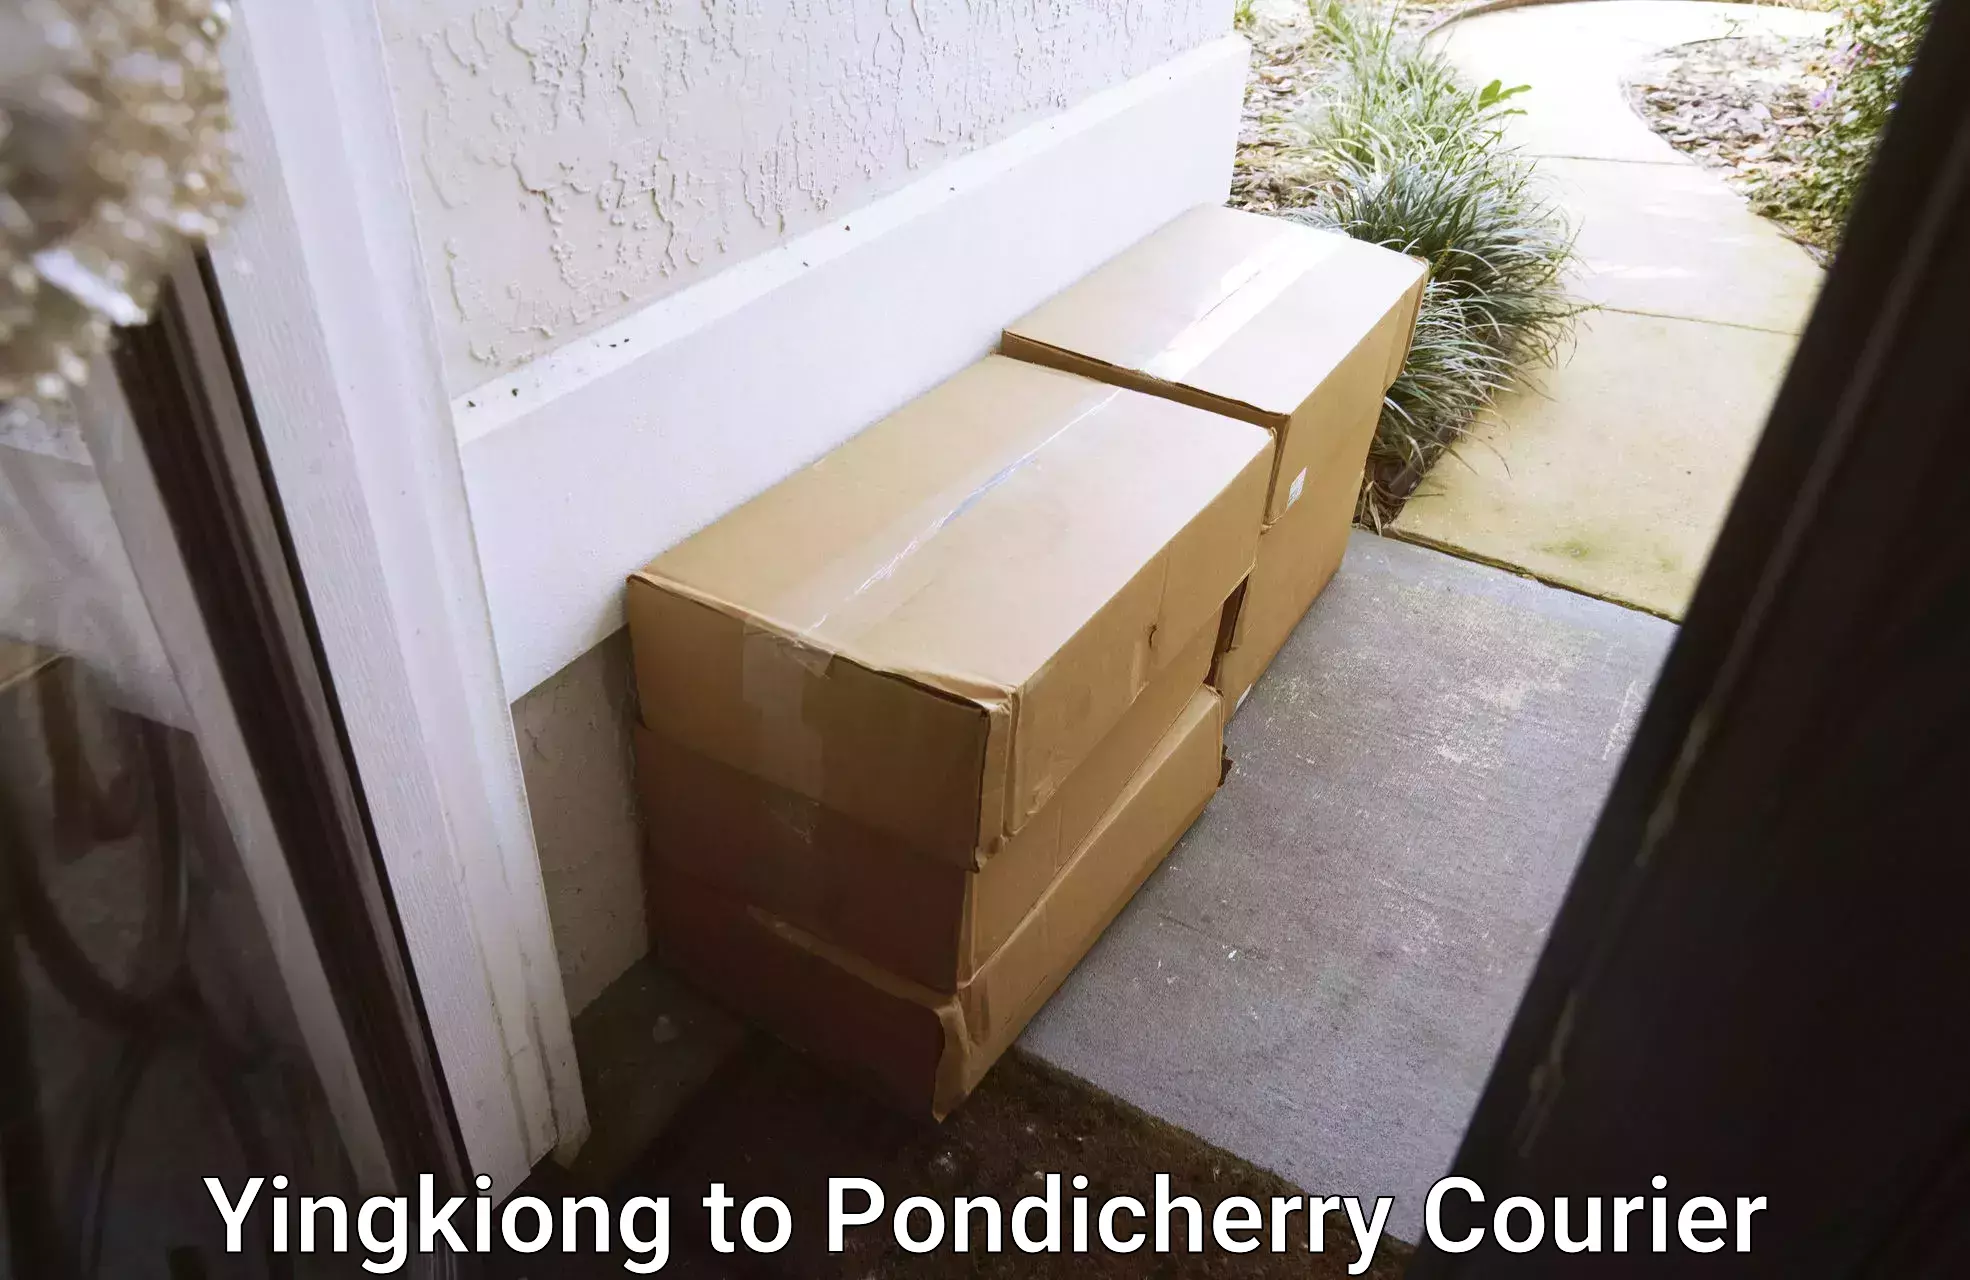 Ocean freight courier Yingkiong to Pondicherry